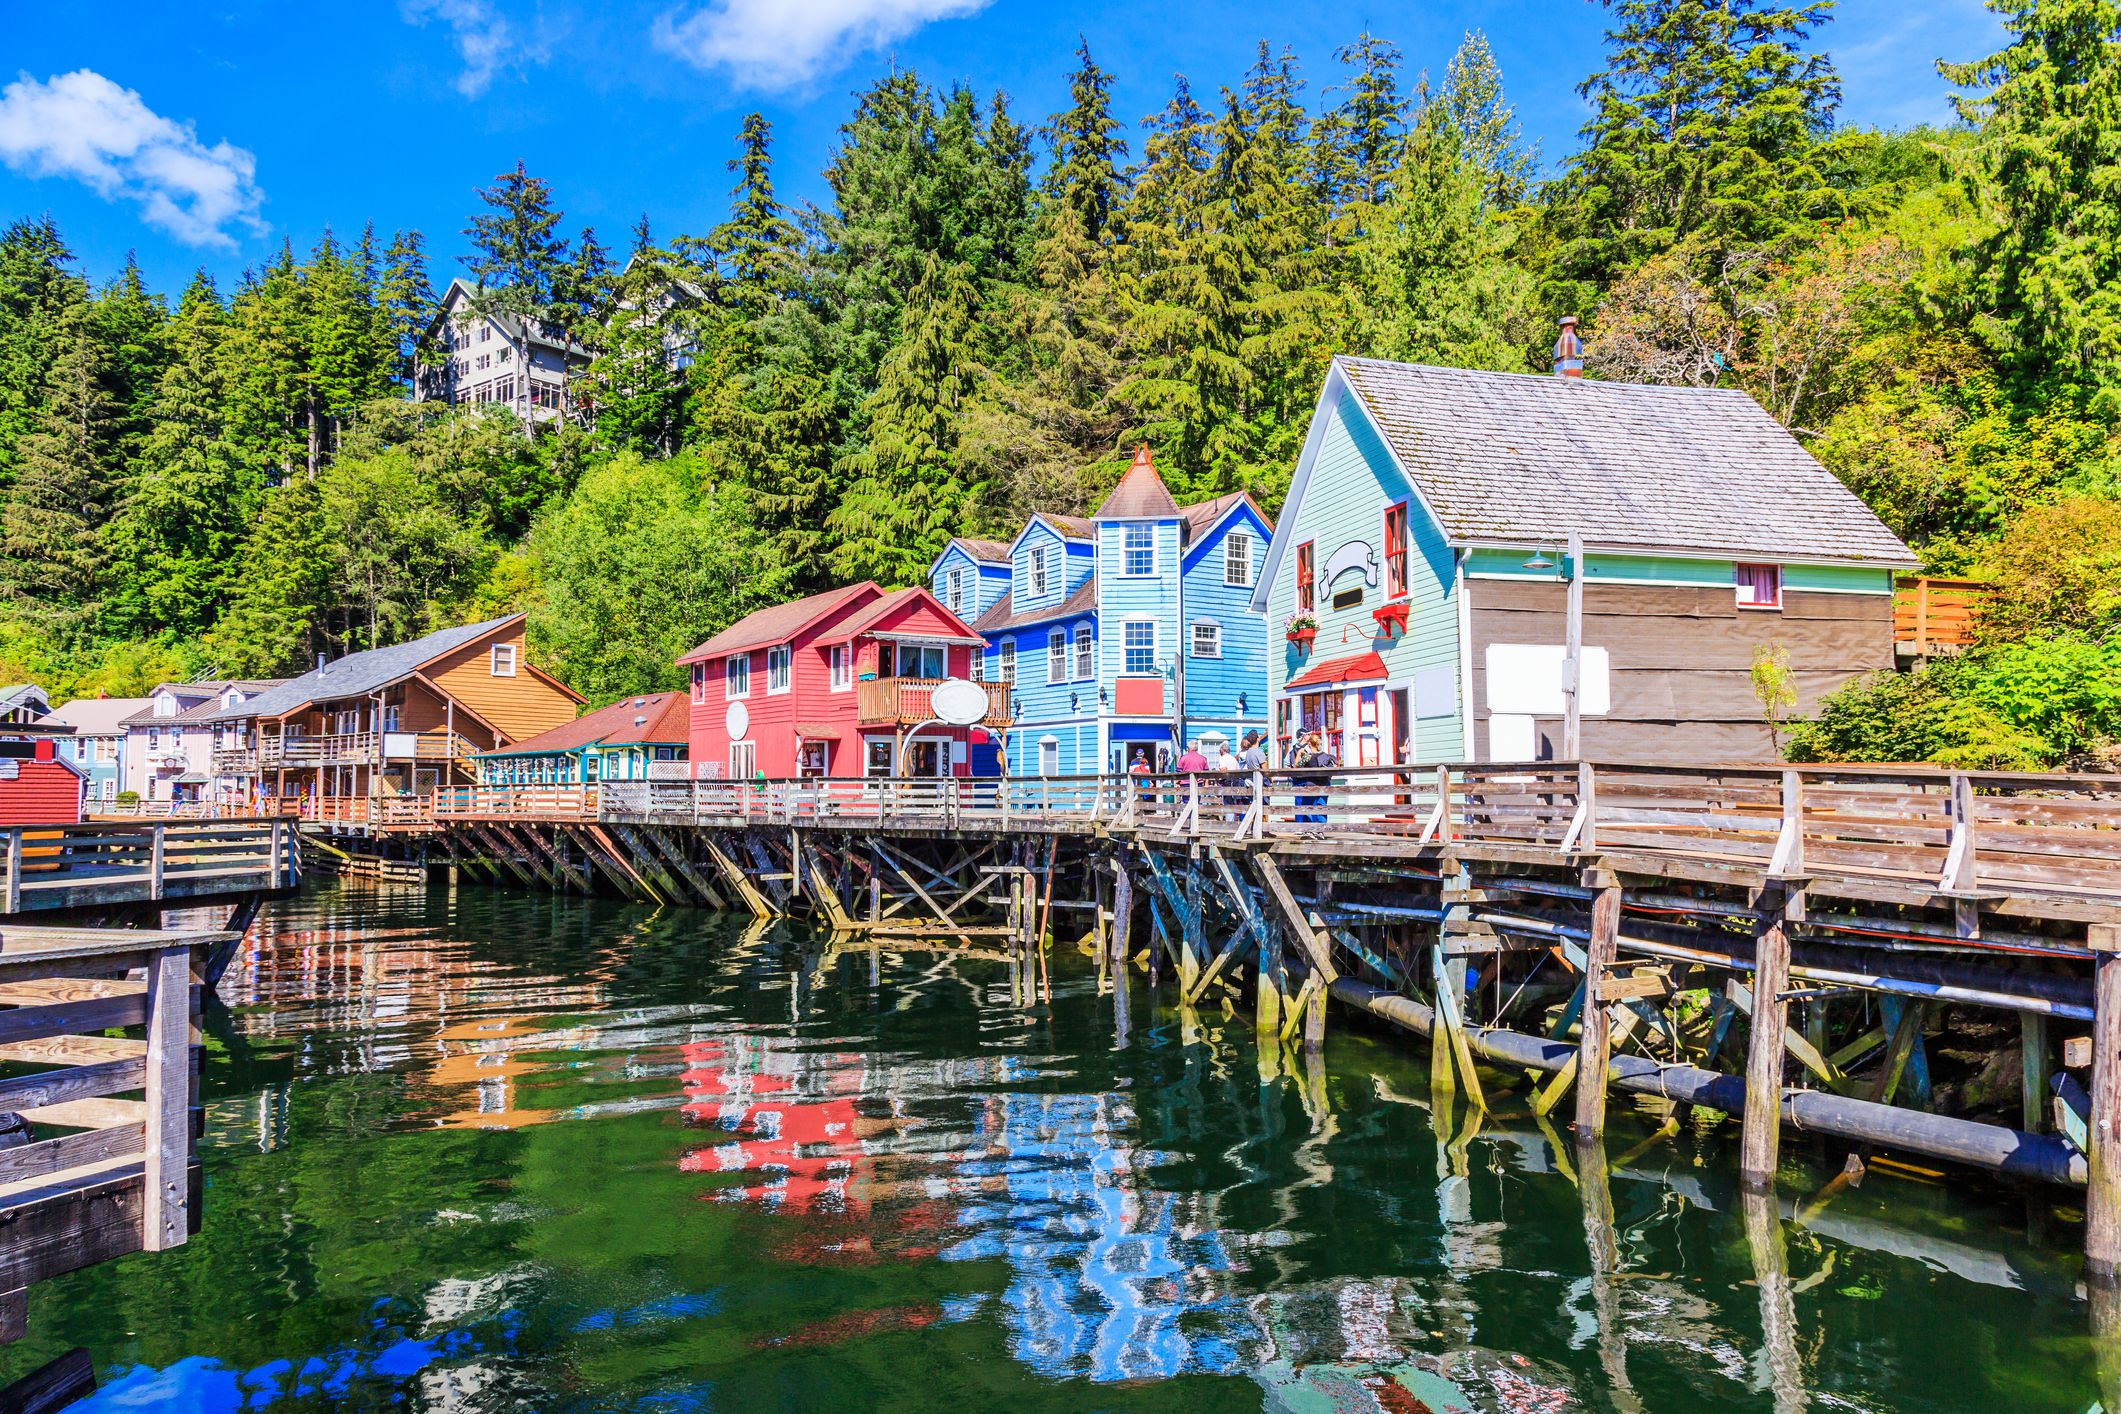 <p>Ketchikan is one of the most stunning places to live within the Inside Passage. Abundant wildlife, ample hiking, and a thriving art scene make Ketchikan a unique place for young adults to settle down — especially those who don’t like big-city living.</p><ul><li>Population: 8,068</li><li>Median Household Income: $68,125</li><li>Median Rent Price: $1,166</li><li>Home Price-to-Income Ratio: 3.97</li><li>Average Property Tax: 0.81%</li></ul><p class="padding-top-ms u-margin-bottom-ms"><b>Housing Affordability:</b> Rent and home purchase prices are more affordable in Ketchikan than other places in Alaska. However, the median household income is also lower. If you’re a young adult with a high-paying remote job, you can make your dollars stretch further in Ketchikan than you could buying property in Anchorage. Ready to start home shopping? Visit a <a href="https://www.sofi.com/home-loan-help-center/">home loan help center</a> to learn more about mortgage options.</p>